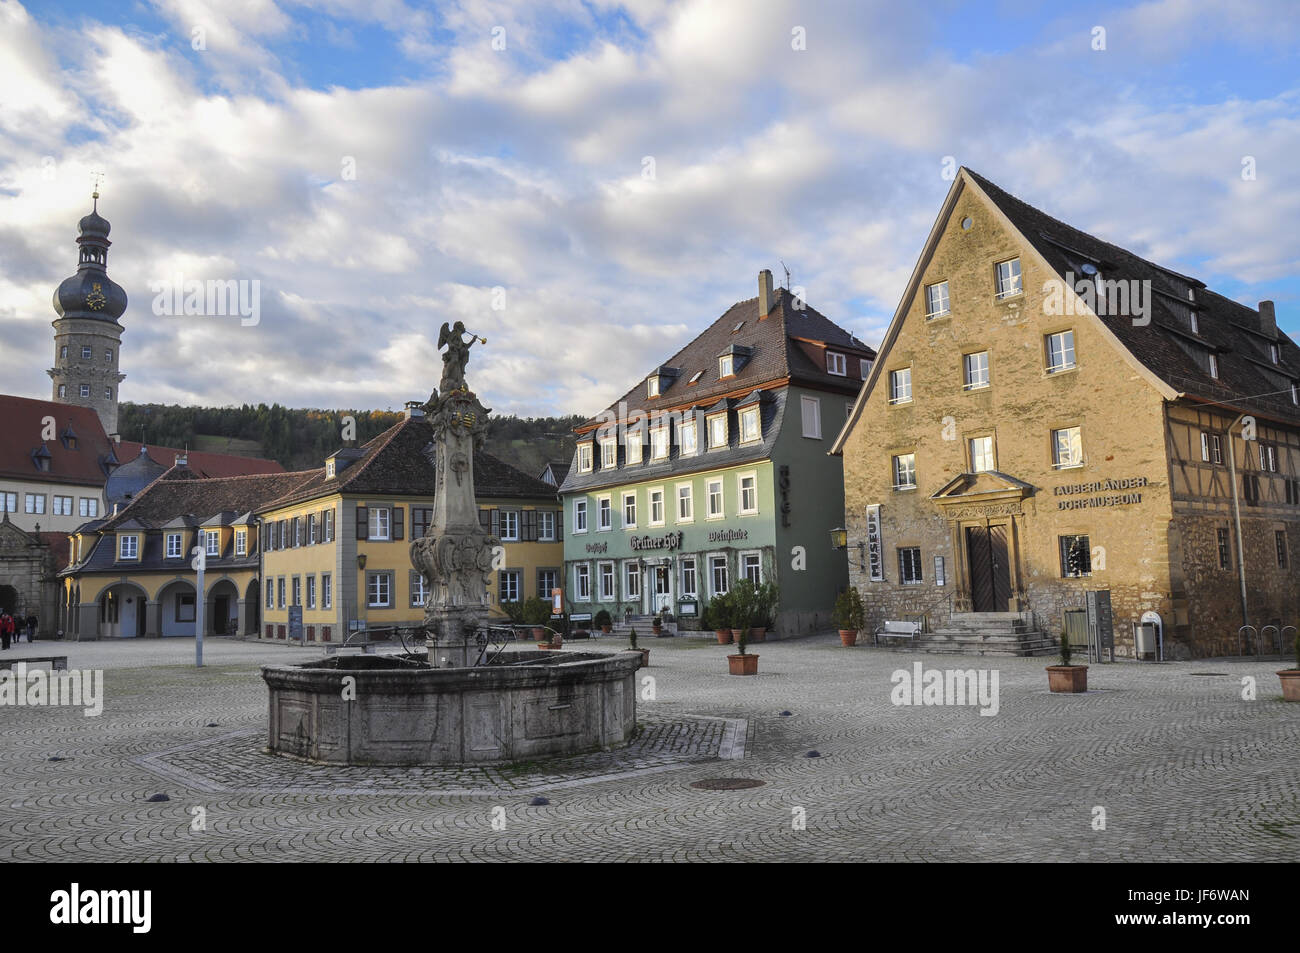 Historic Market place in Weikersheim, Germany Stock Photo